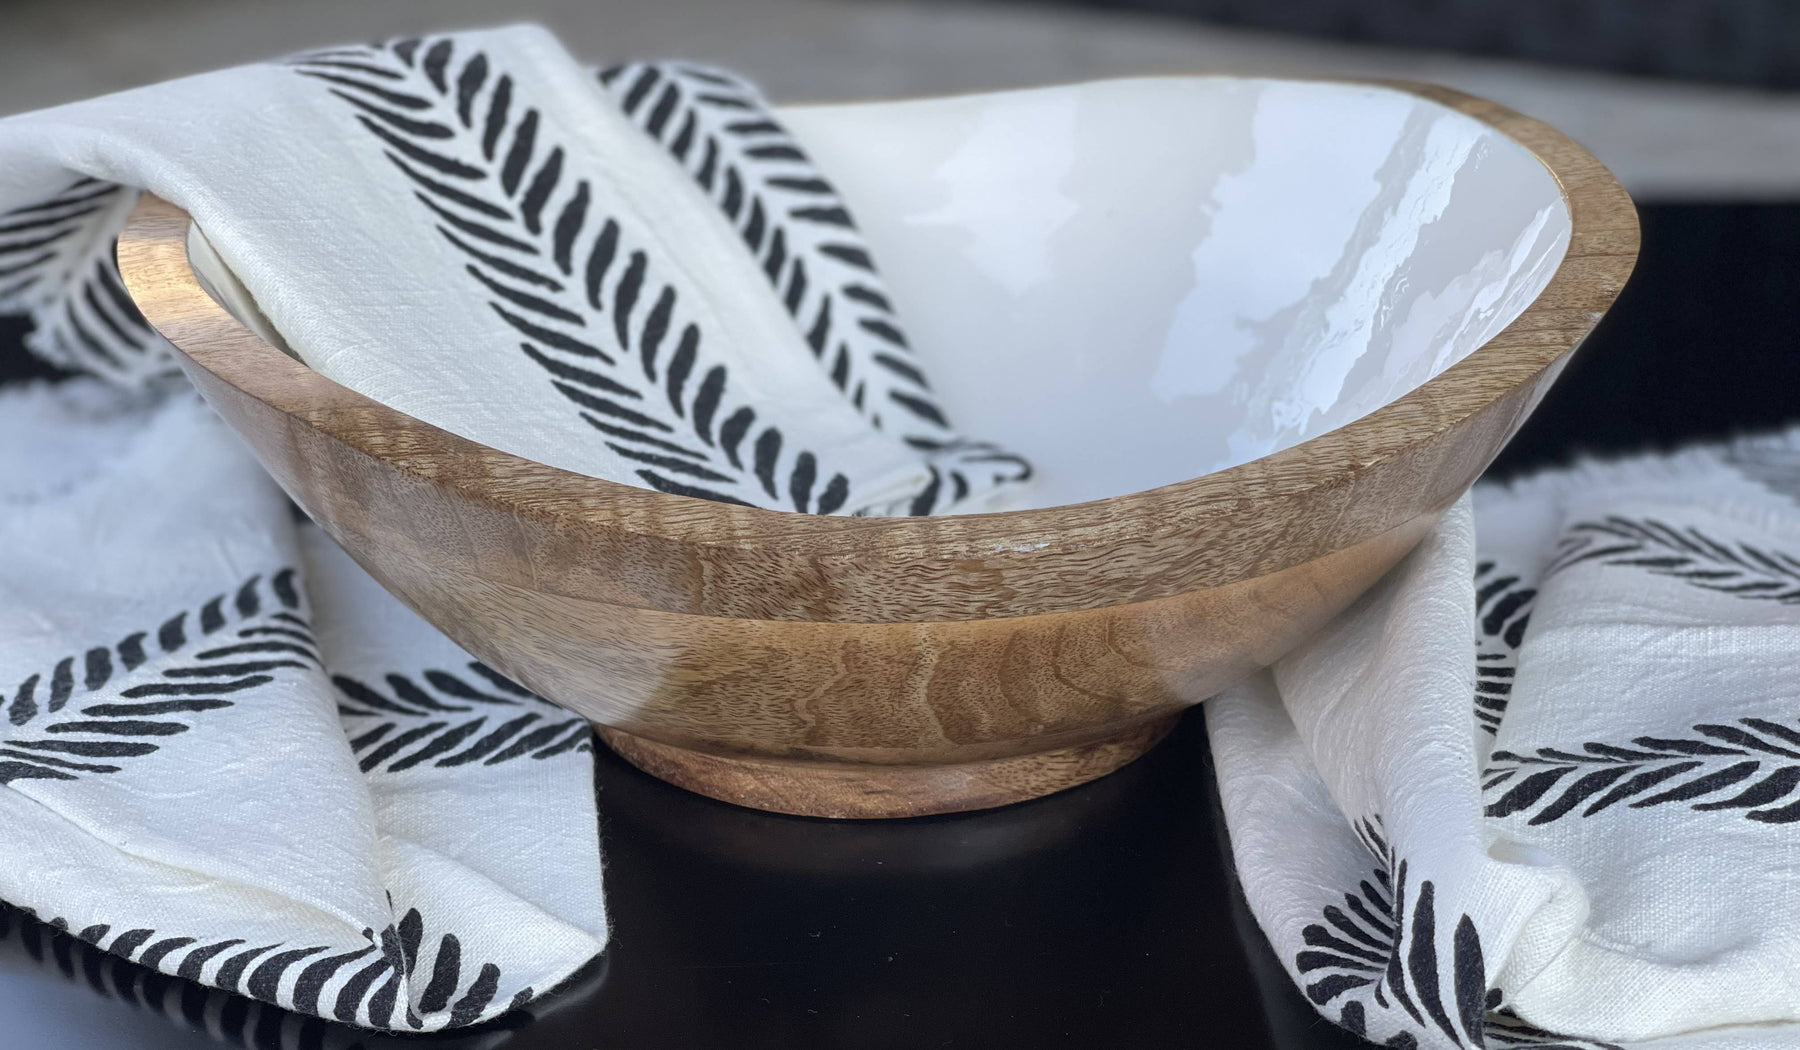 Season and Stir™ Gift Set - Wooden Serving Bowl with 2 Dish Towels